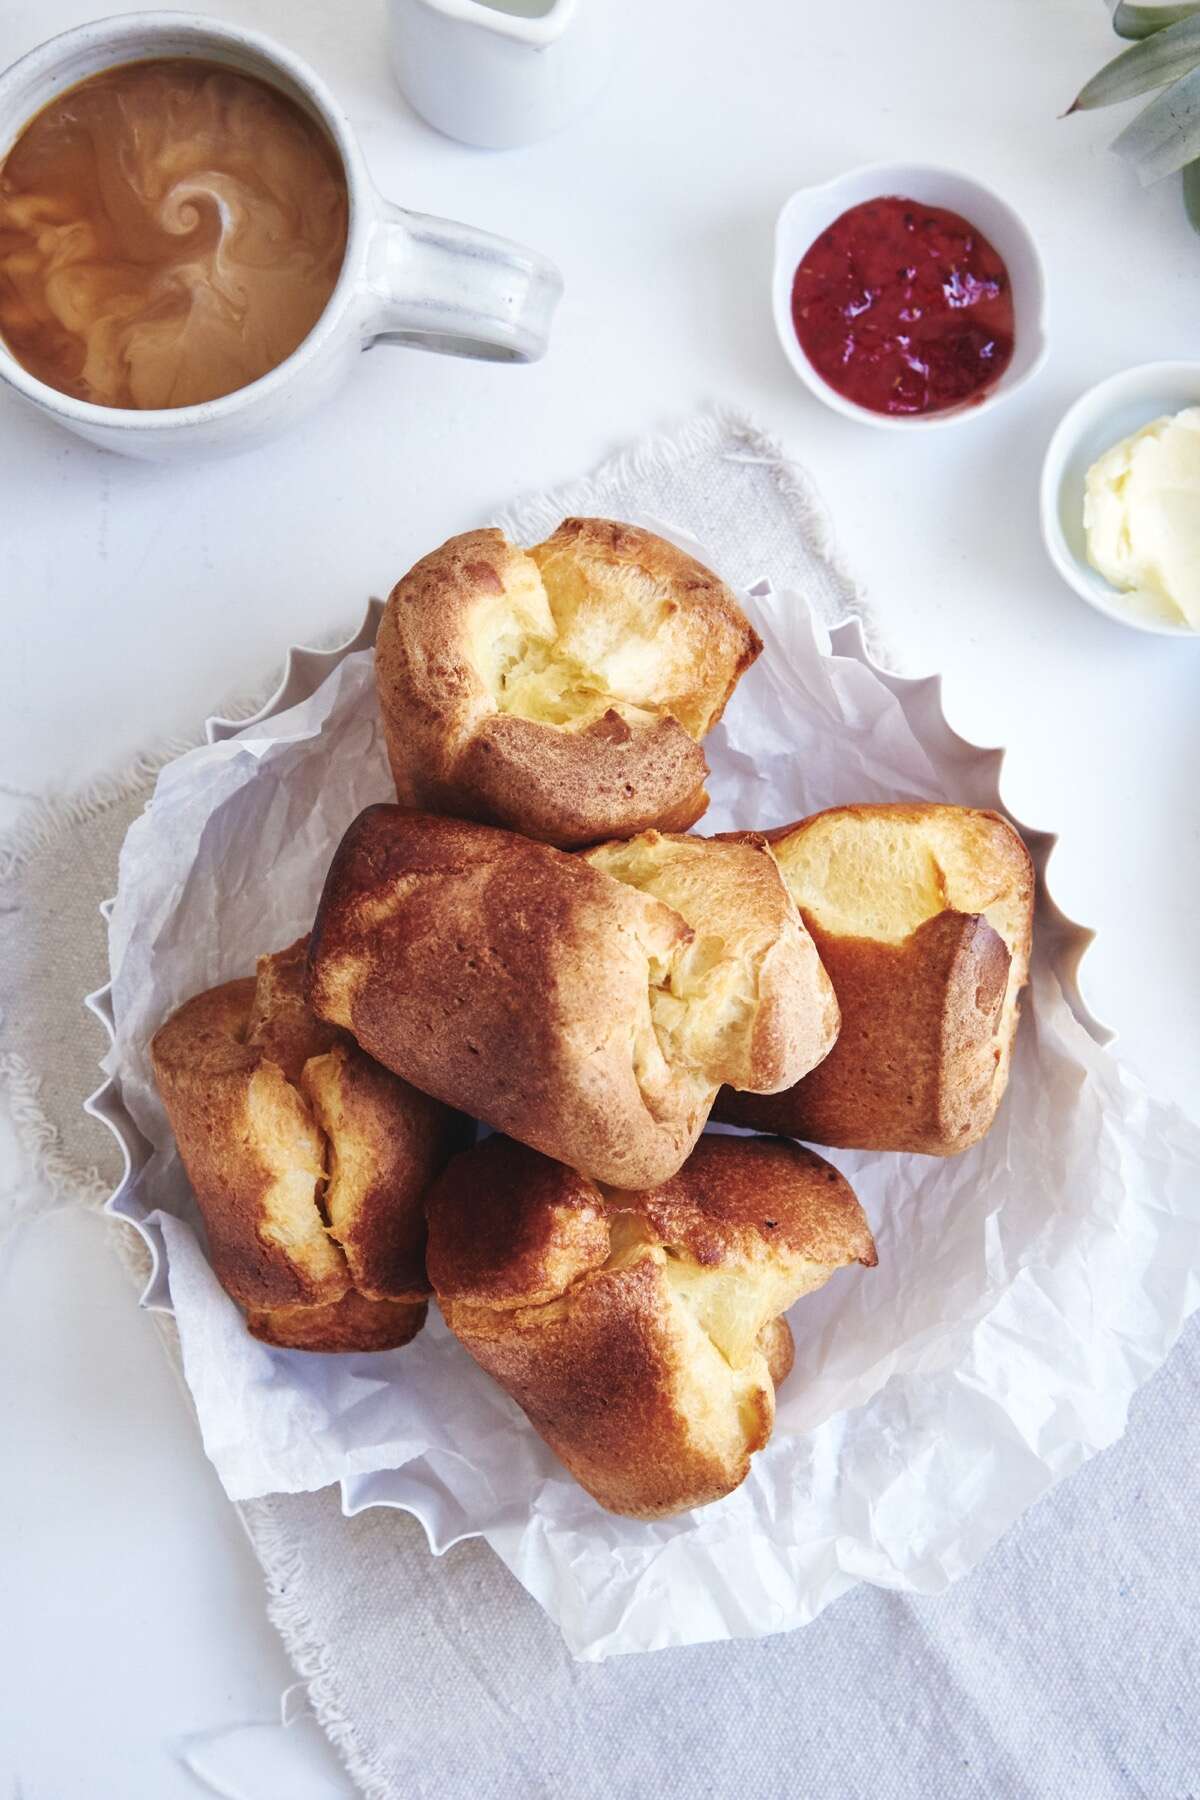 Basket of sourdough popovers on a table with jam, butter, and a latte.